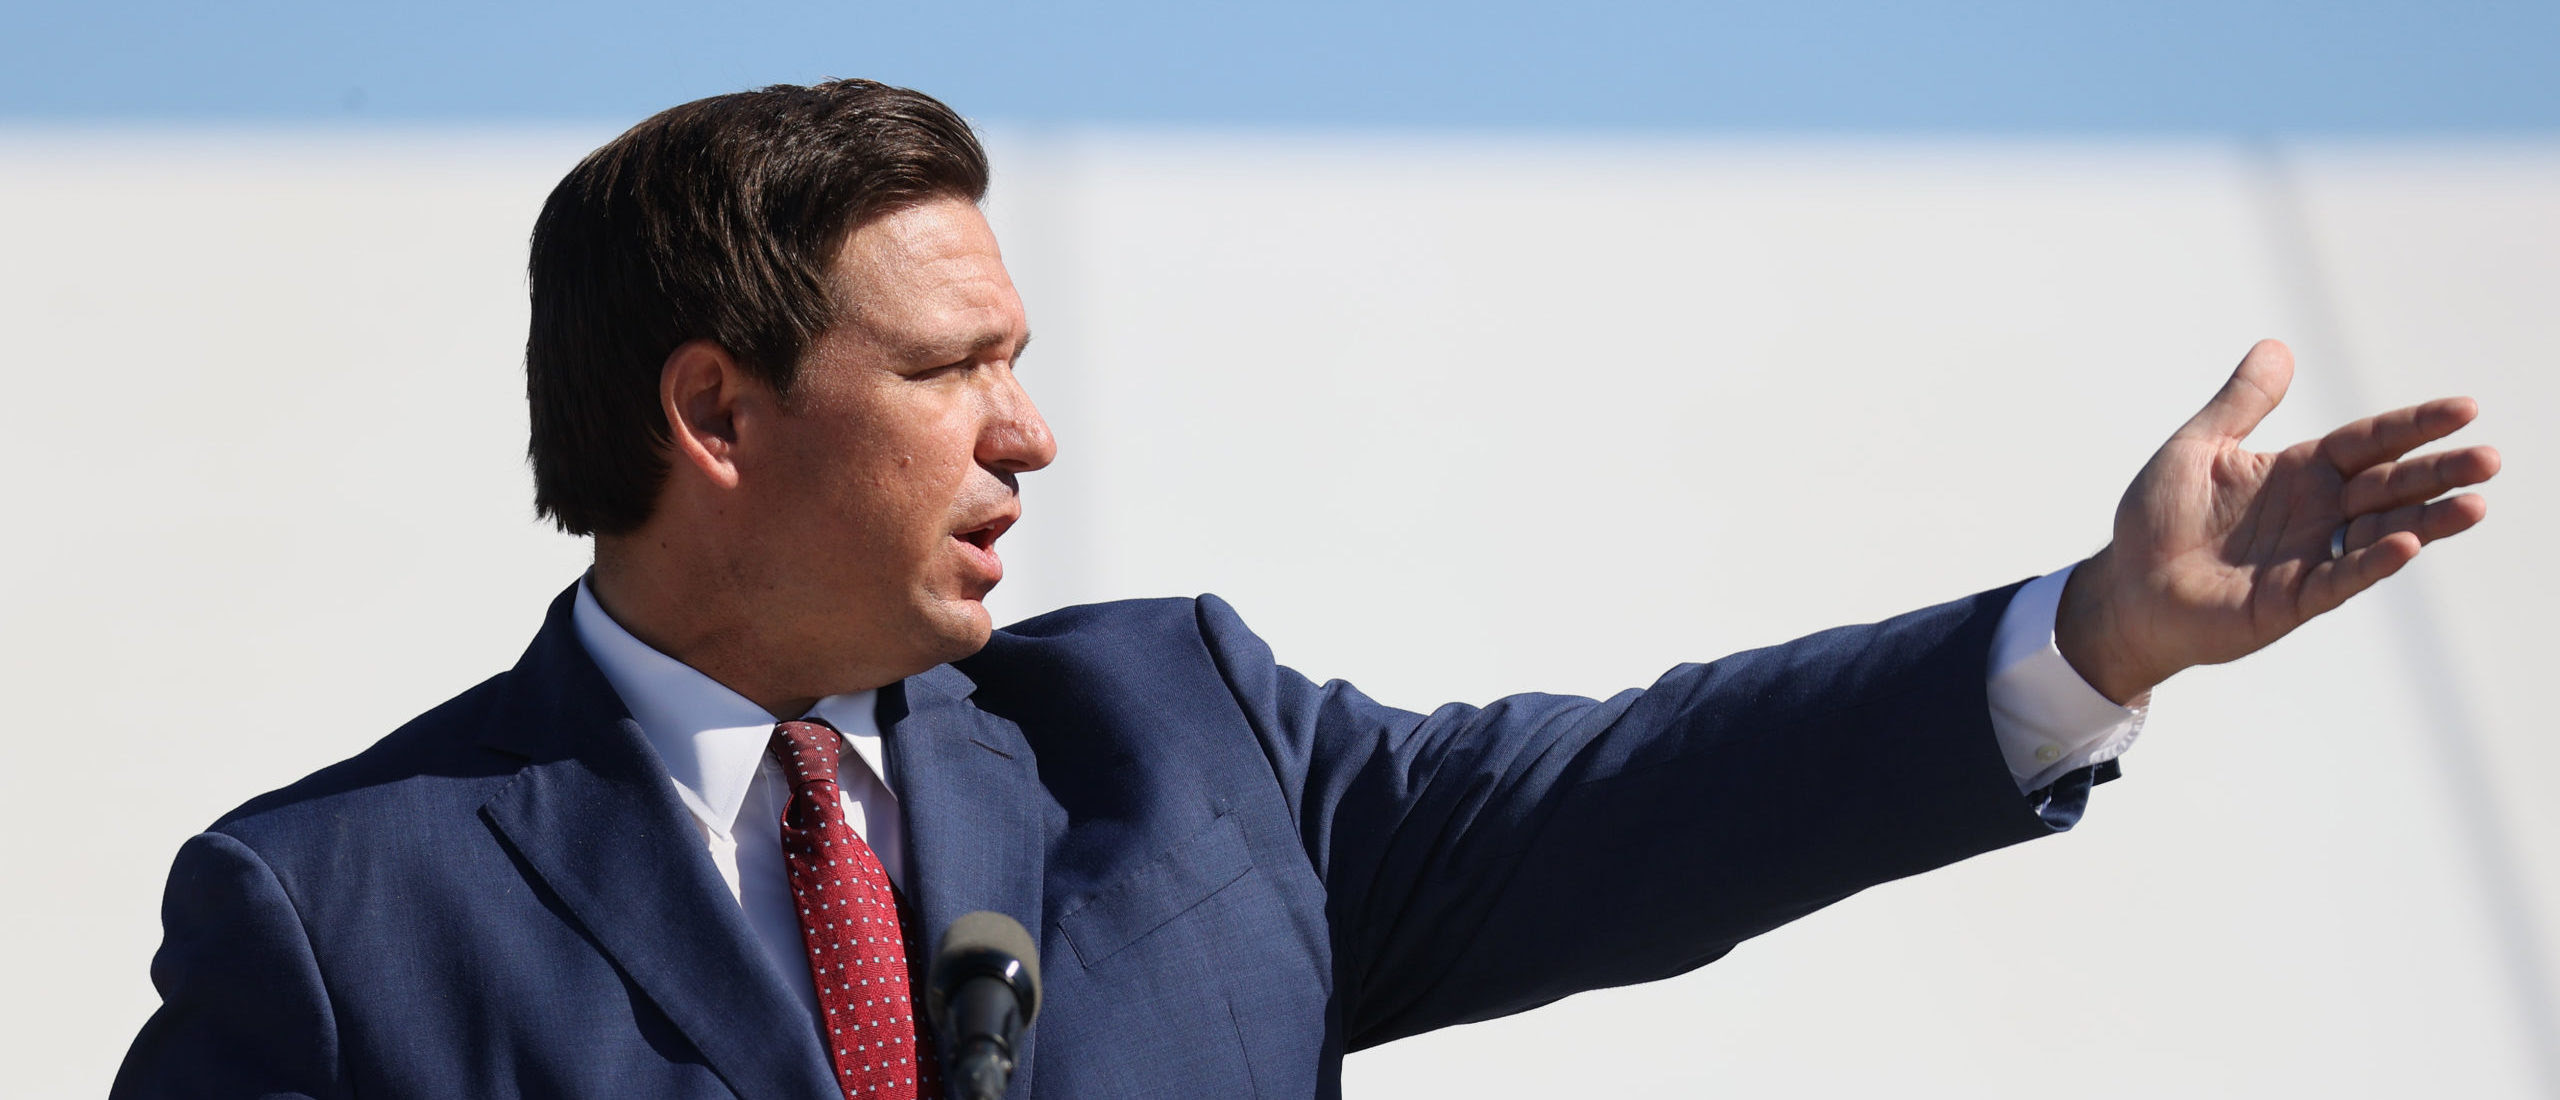 DeSantis To Campaign For Trump-Endorsed Candidates In ‘Unite And Win’ Rally